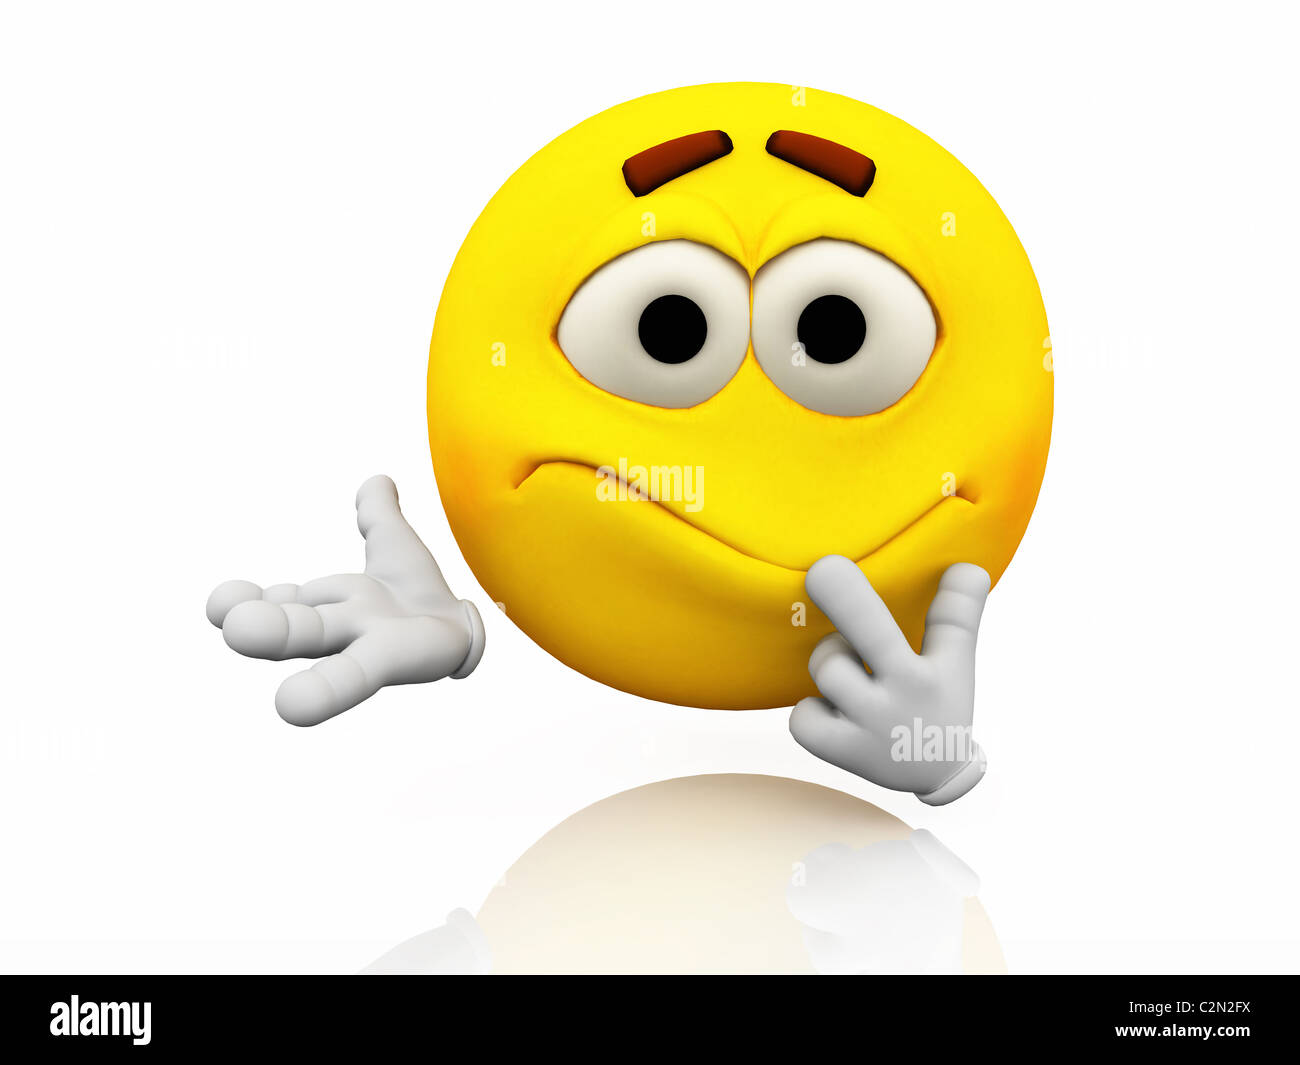 Smiley, Emoticon. Facial expression Confused emotional expression on a yellow face with large eyes. Stock Photo